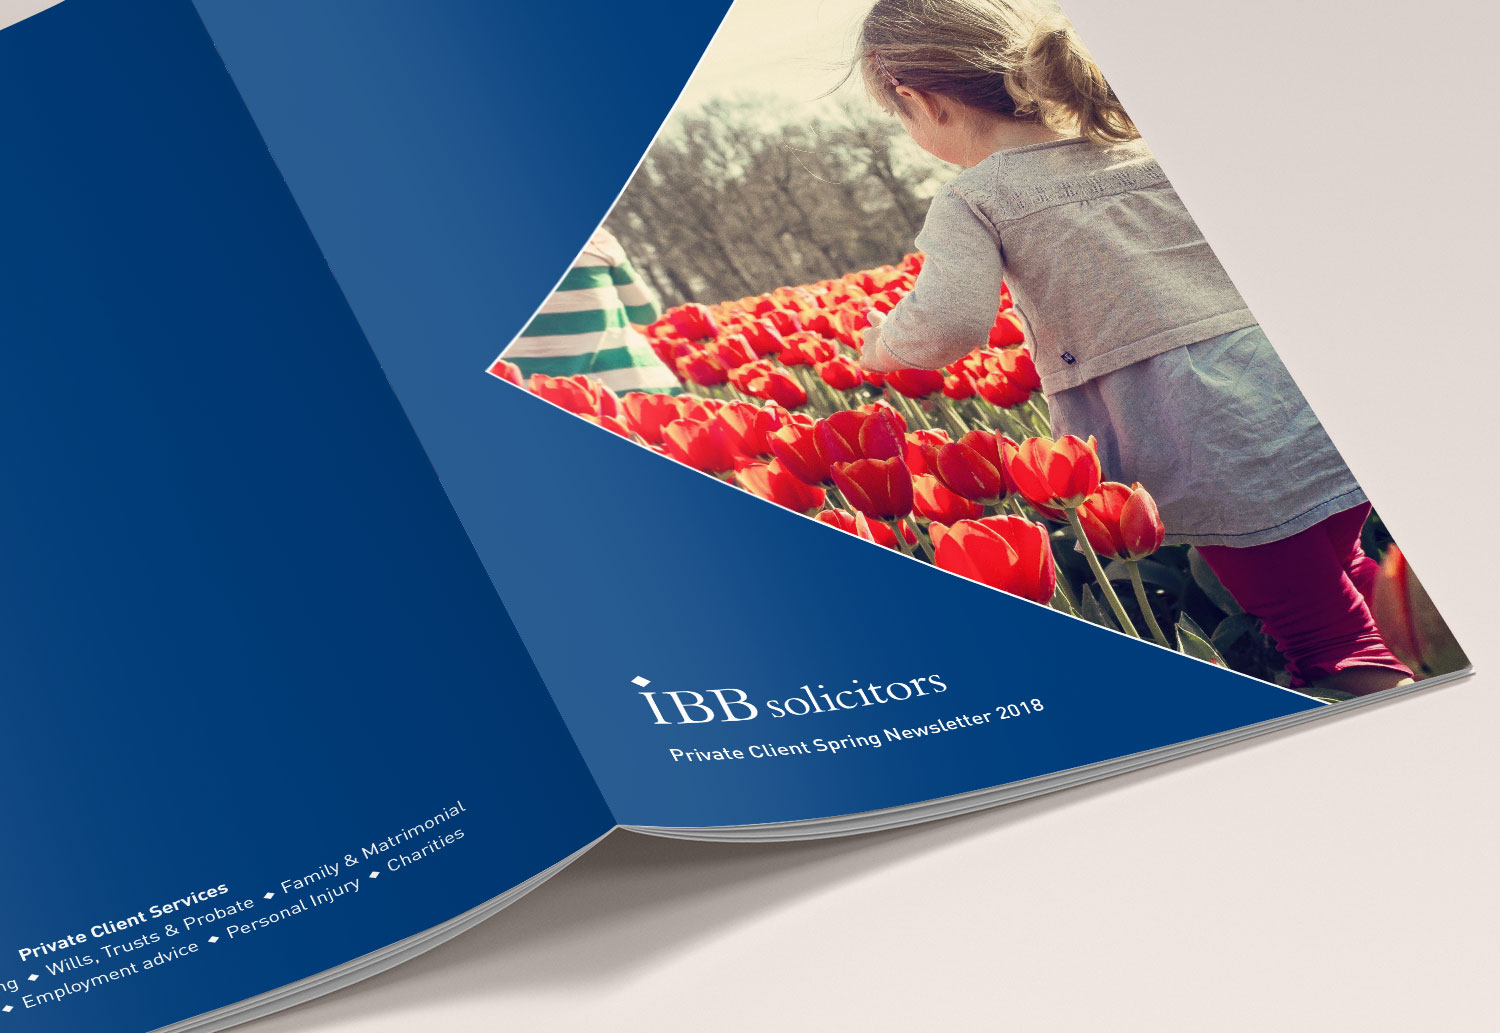 Ibb Solicitors Private Client Spring Newsletter Design My Name Is Dan